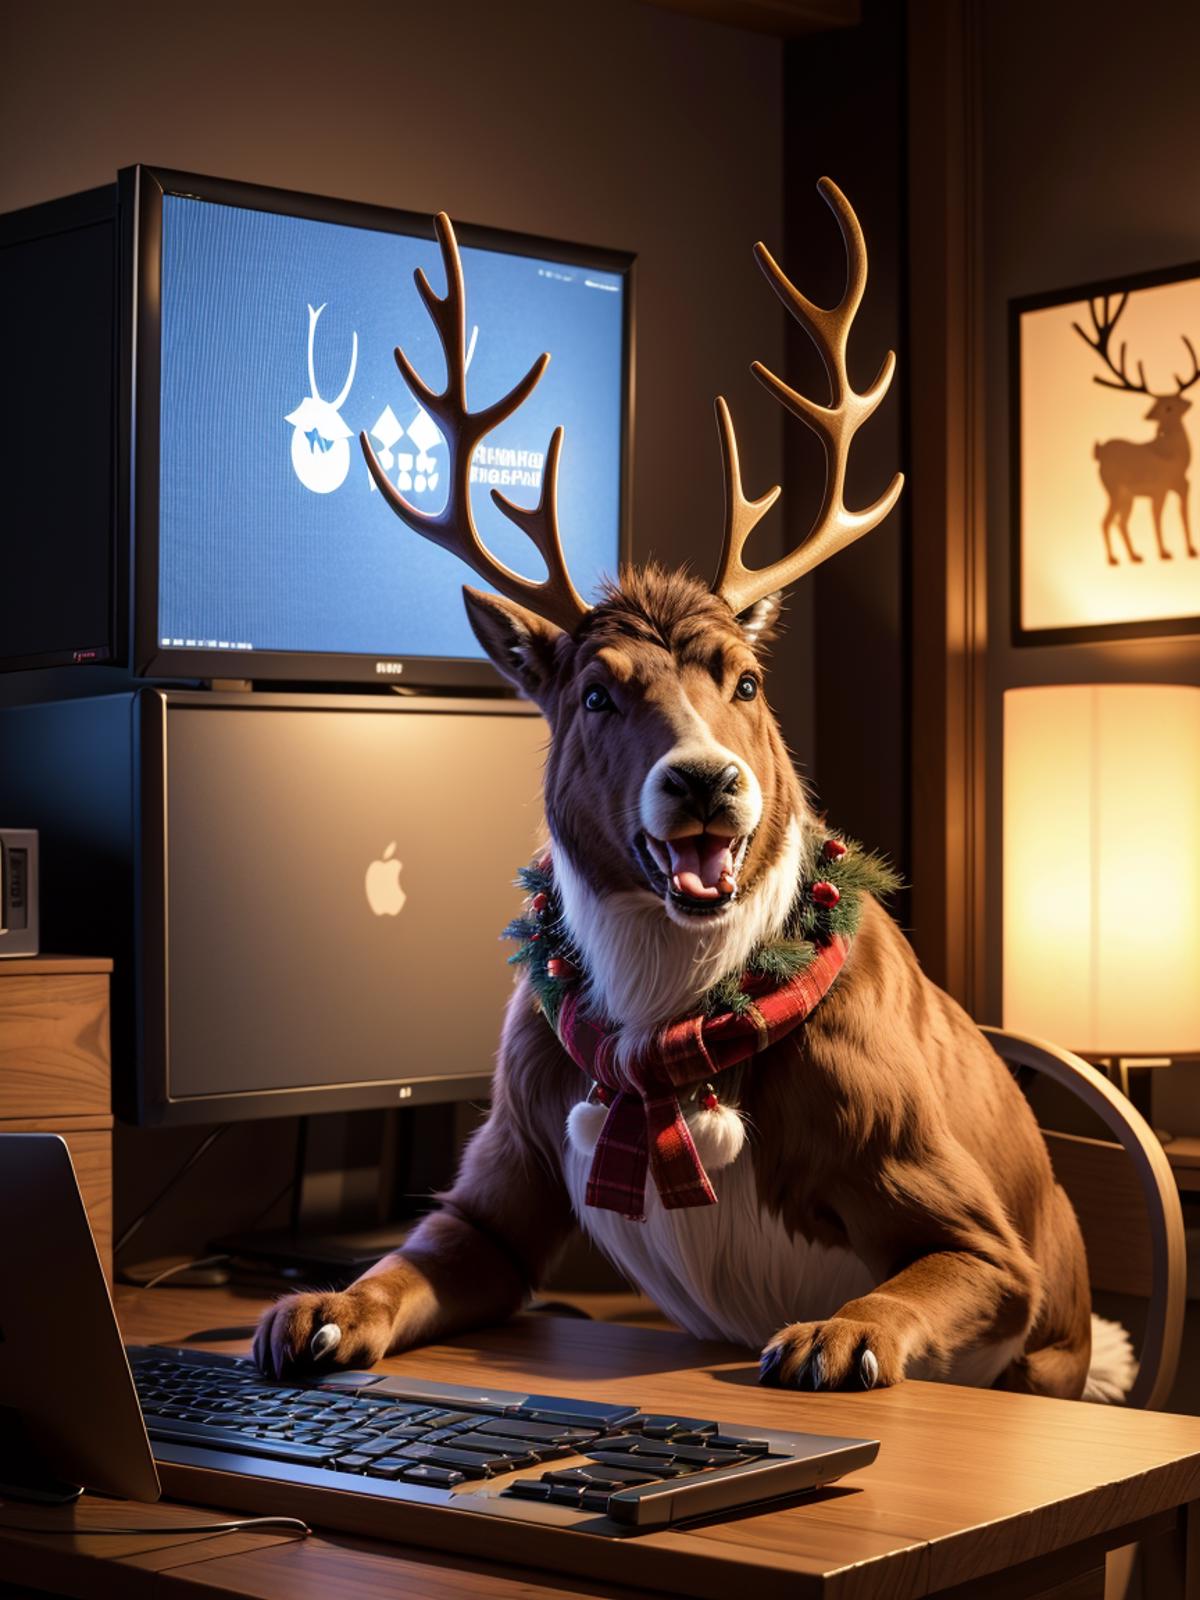 A dog with antlers sitting in front of a computer and a television.